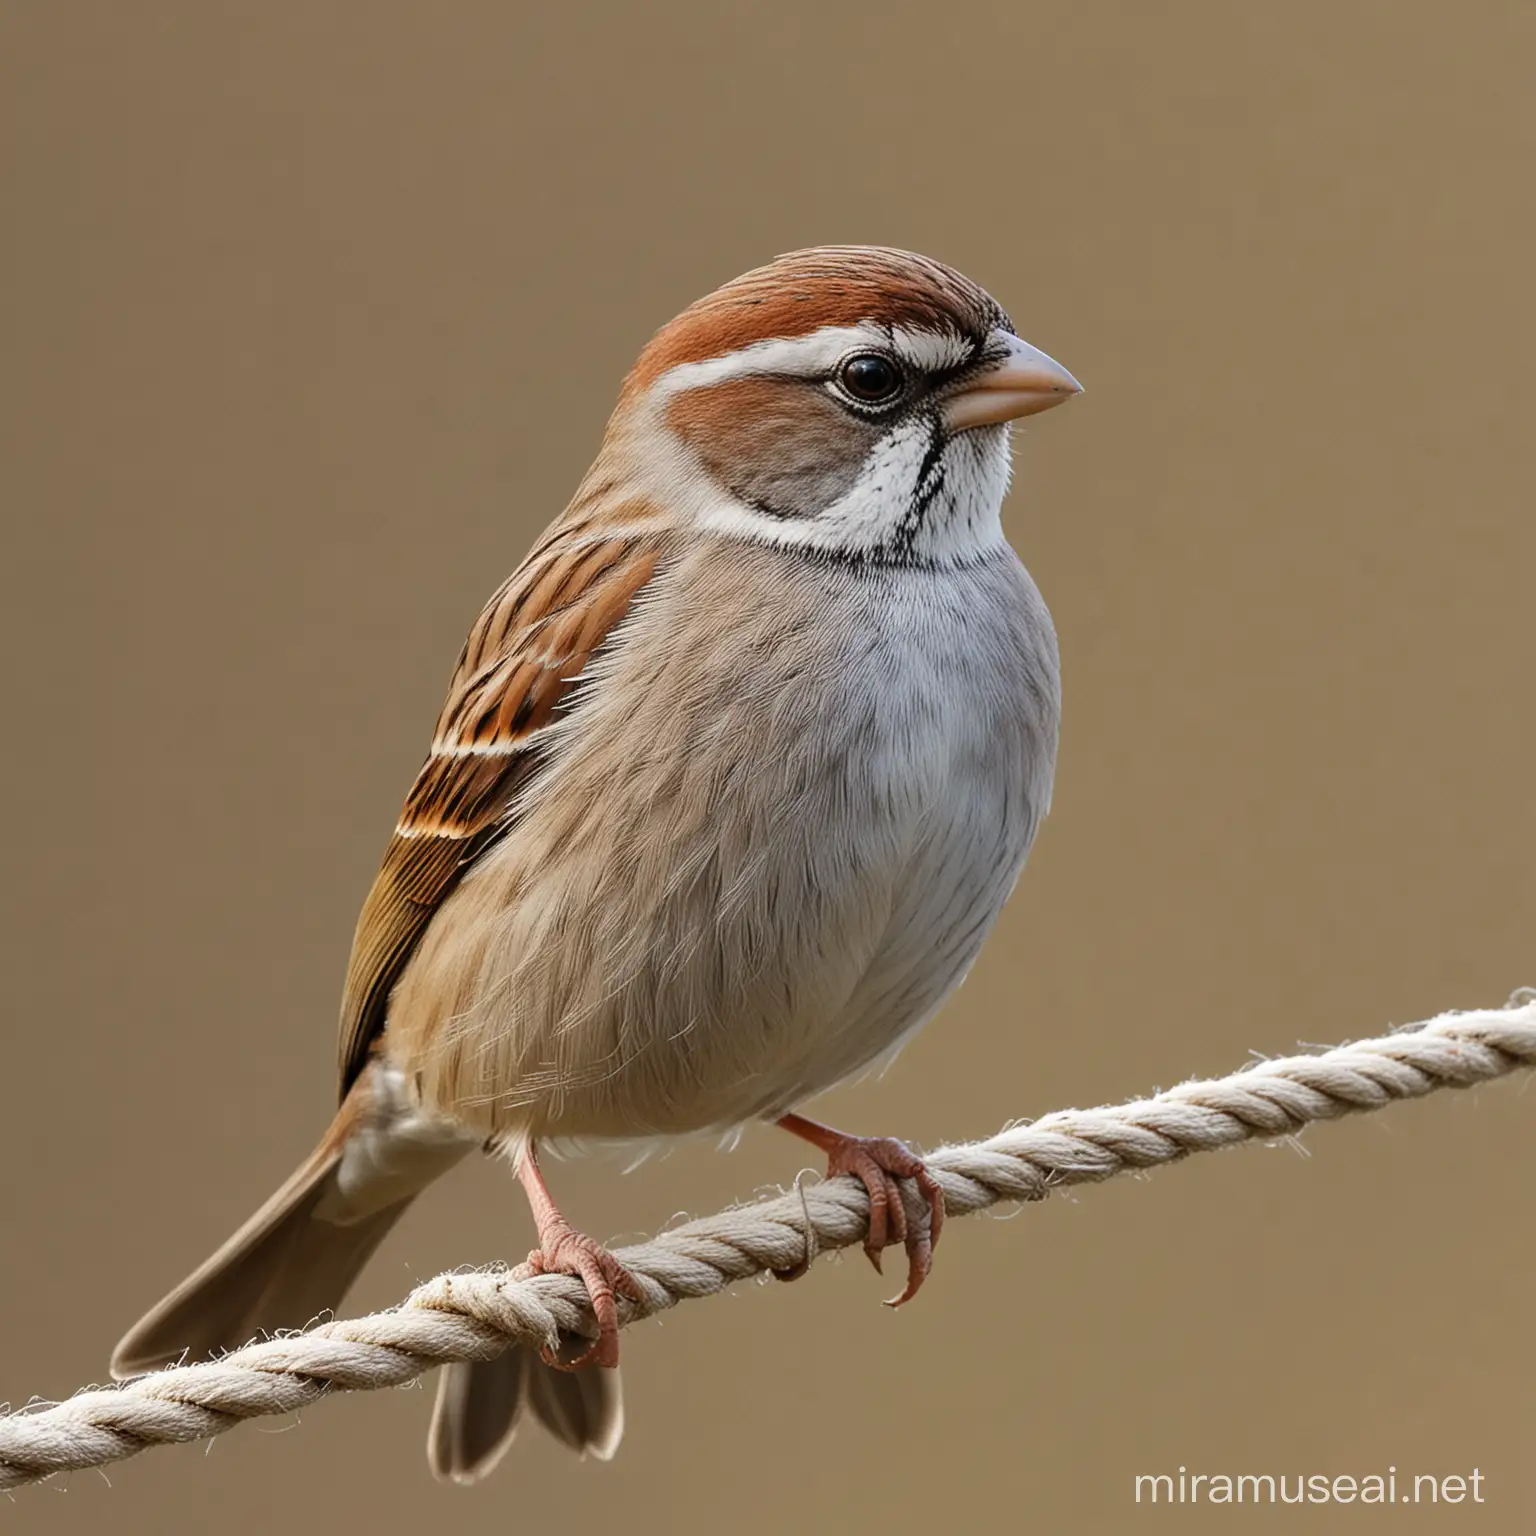 Sparrow with a Rope Necklace in a Serene Setting